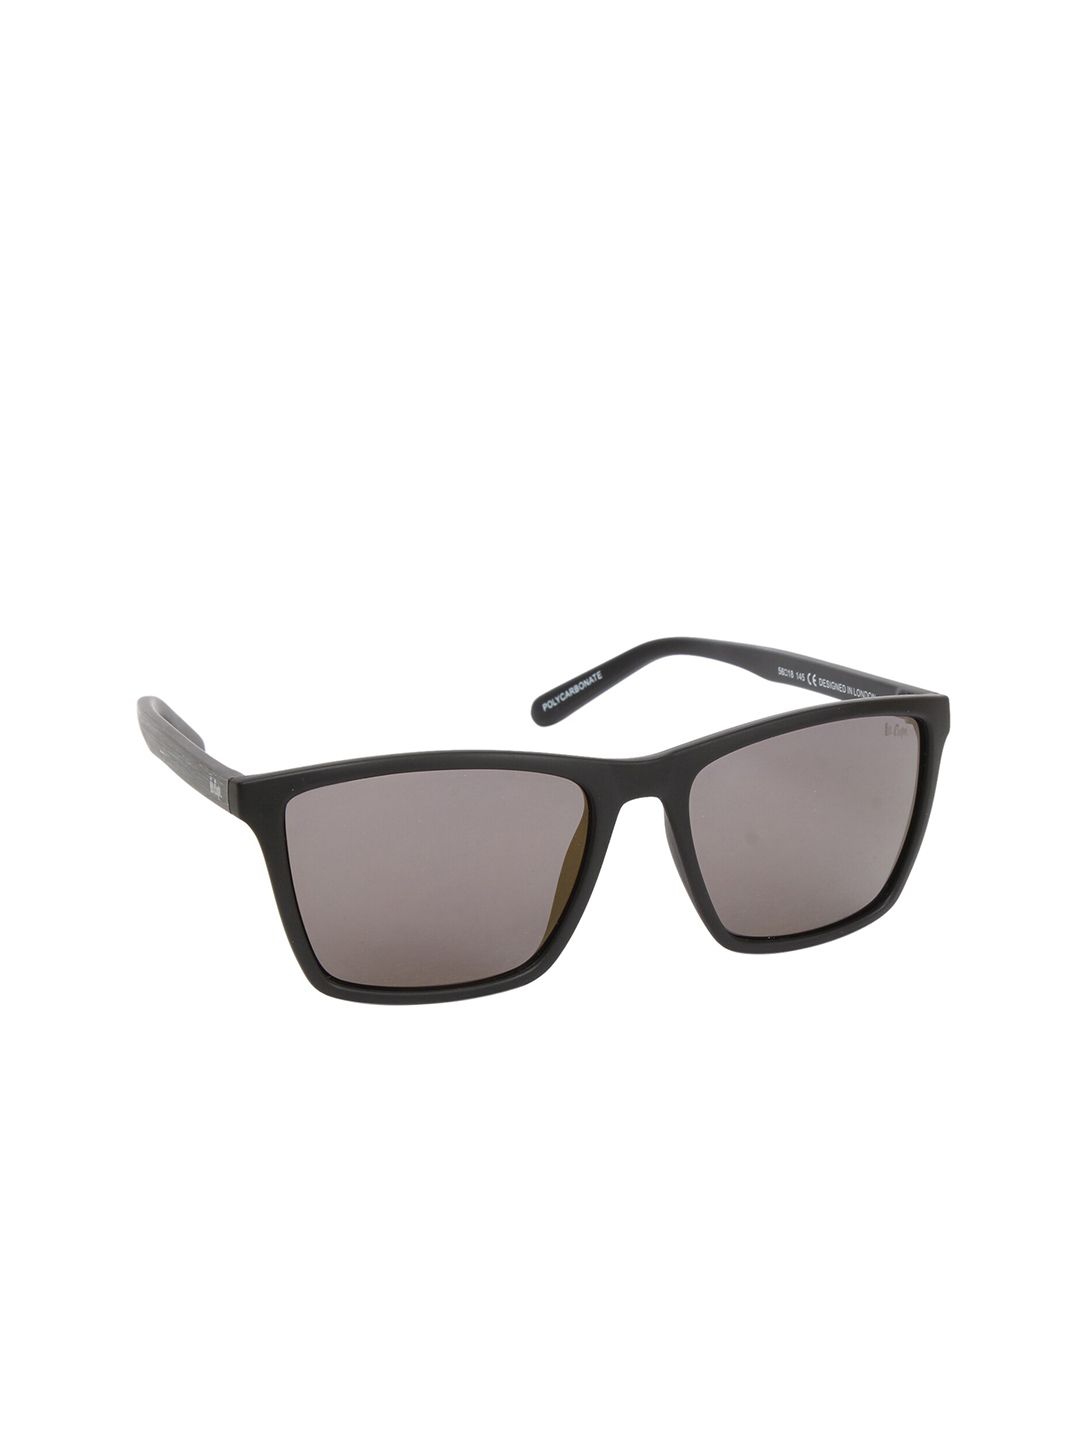 Lee Cooper Unisex Grey Lens & Black Square Sunglasses with UV Protected Lens LC9156NTB Price in India